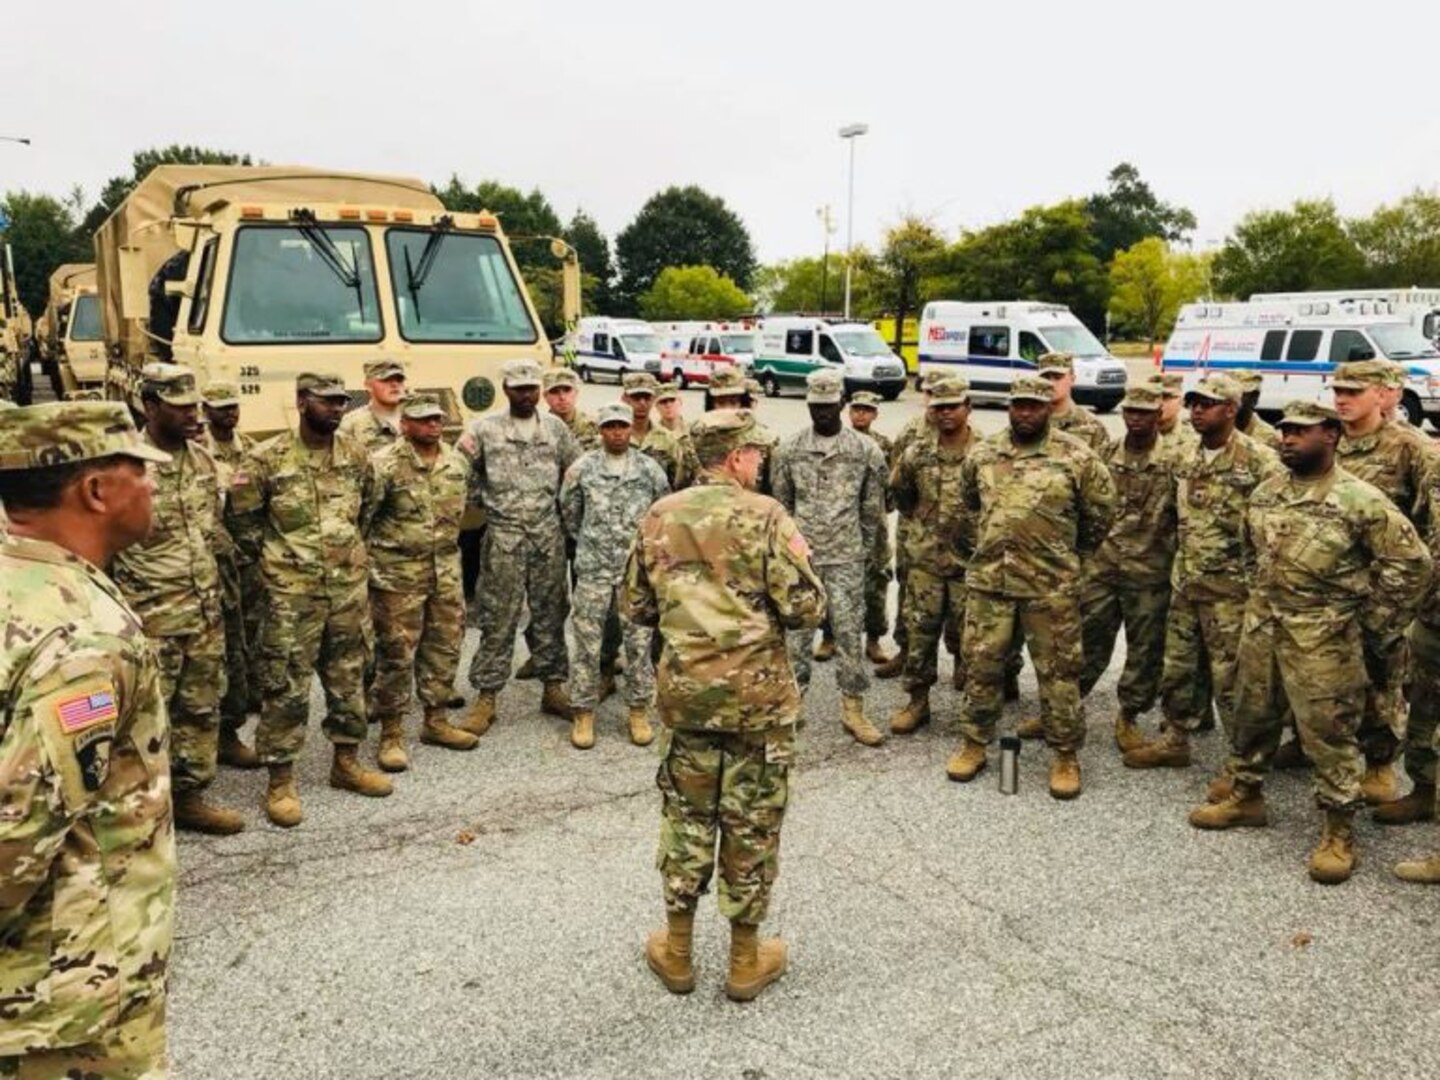 Transporters, aviators return from support missions in the Carolinas